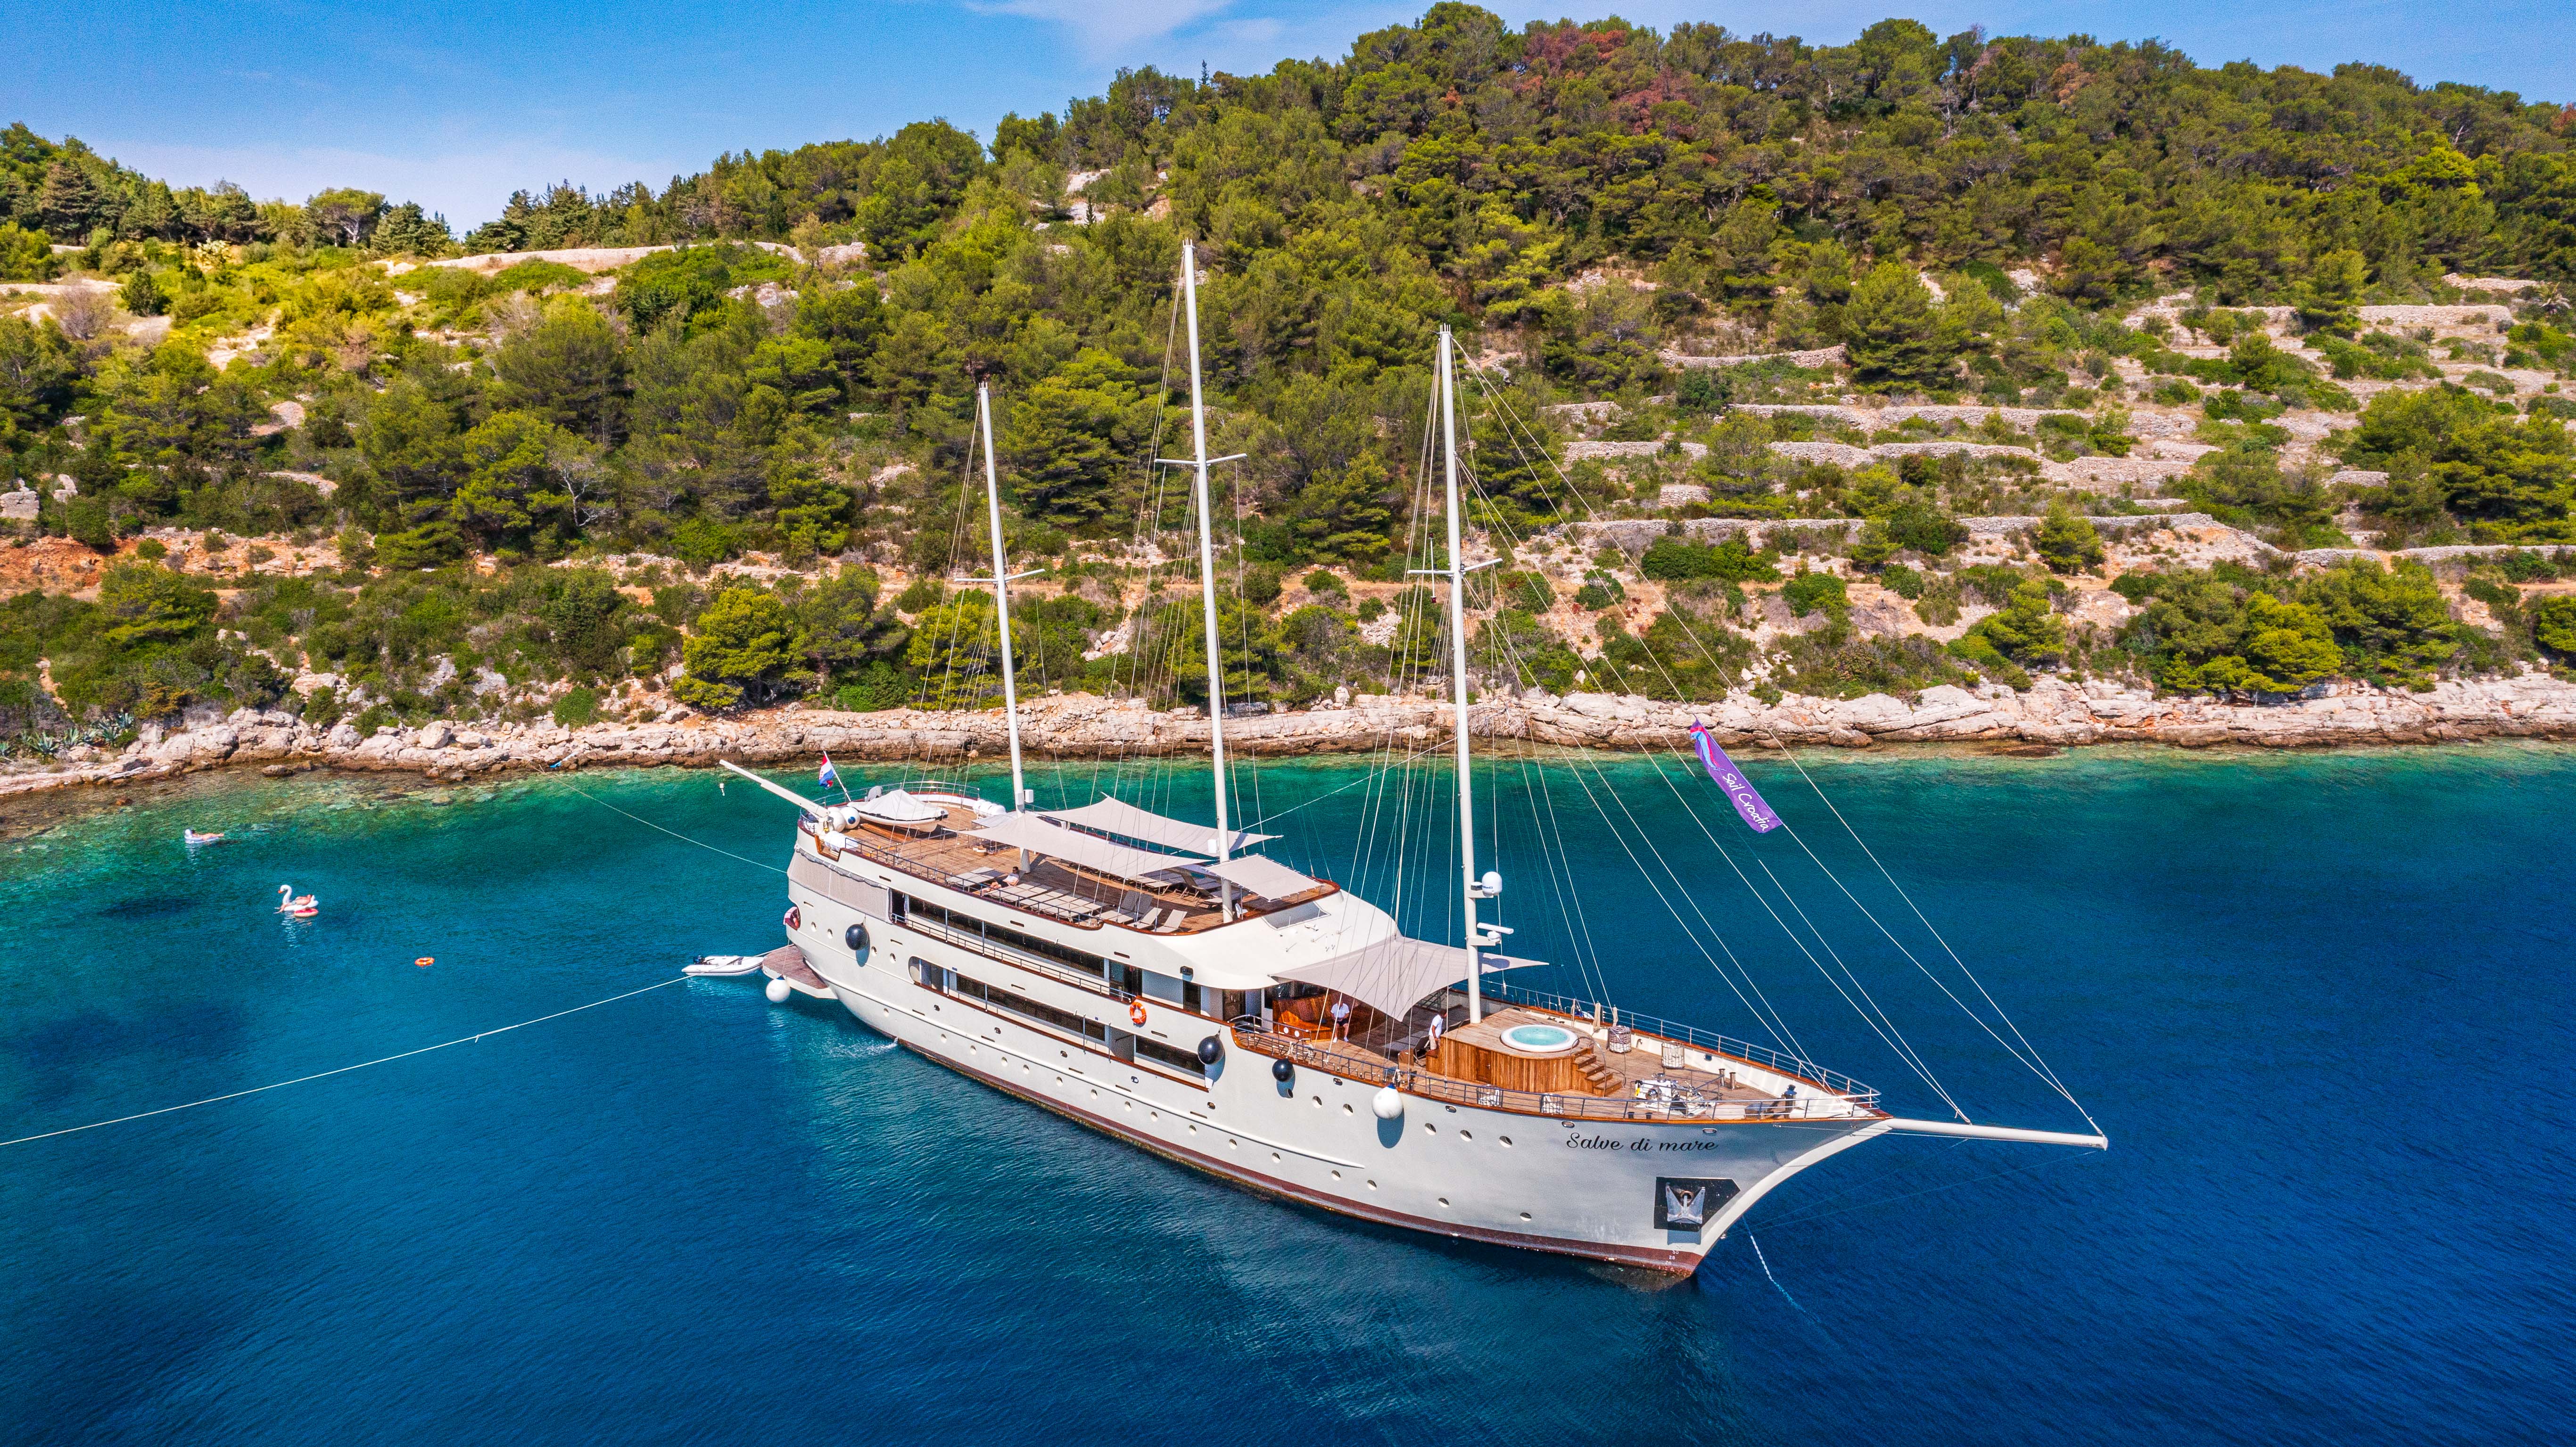 Salve Di Mare ship whisks you along Croatian coast, taking in its many islands